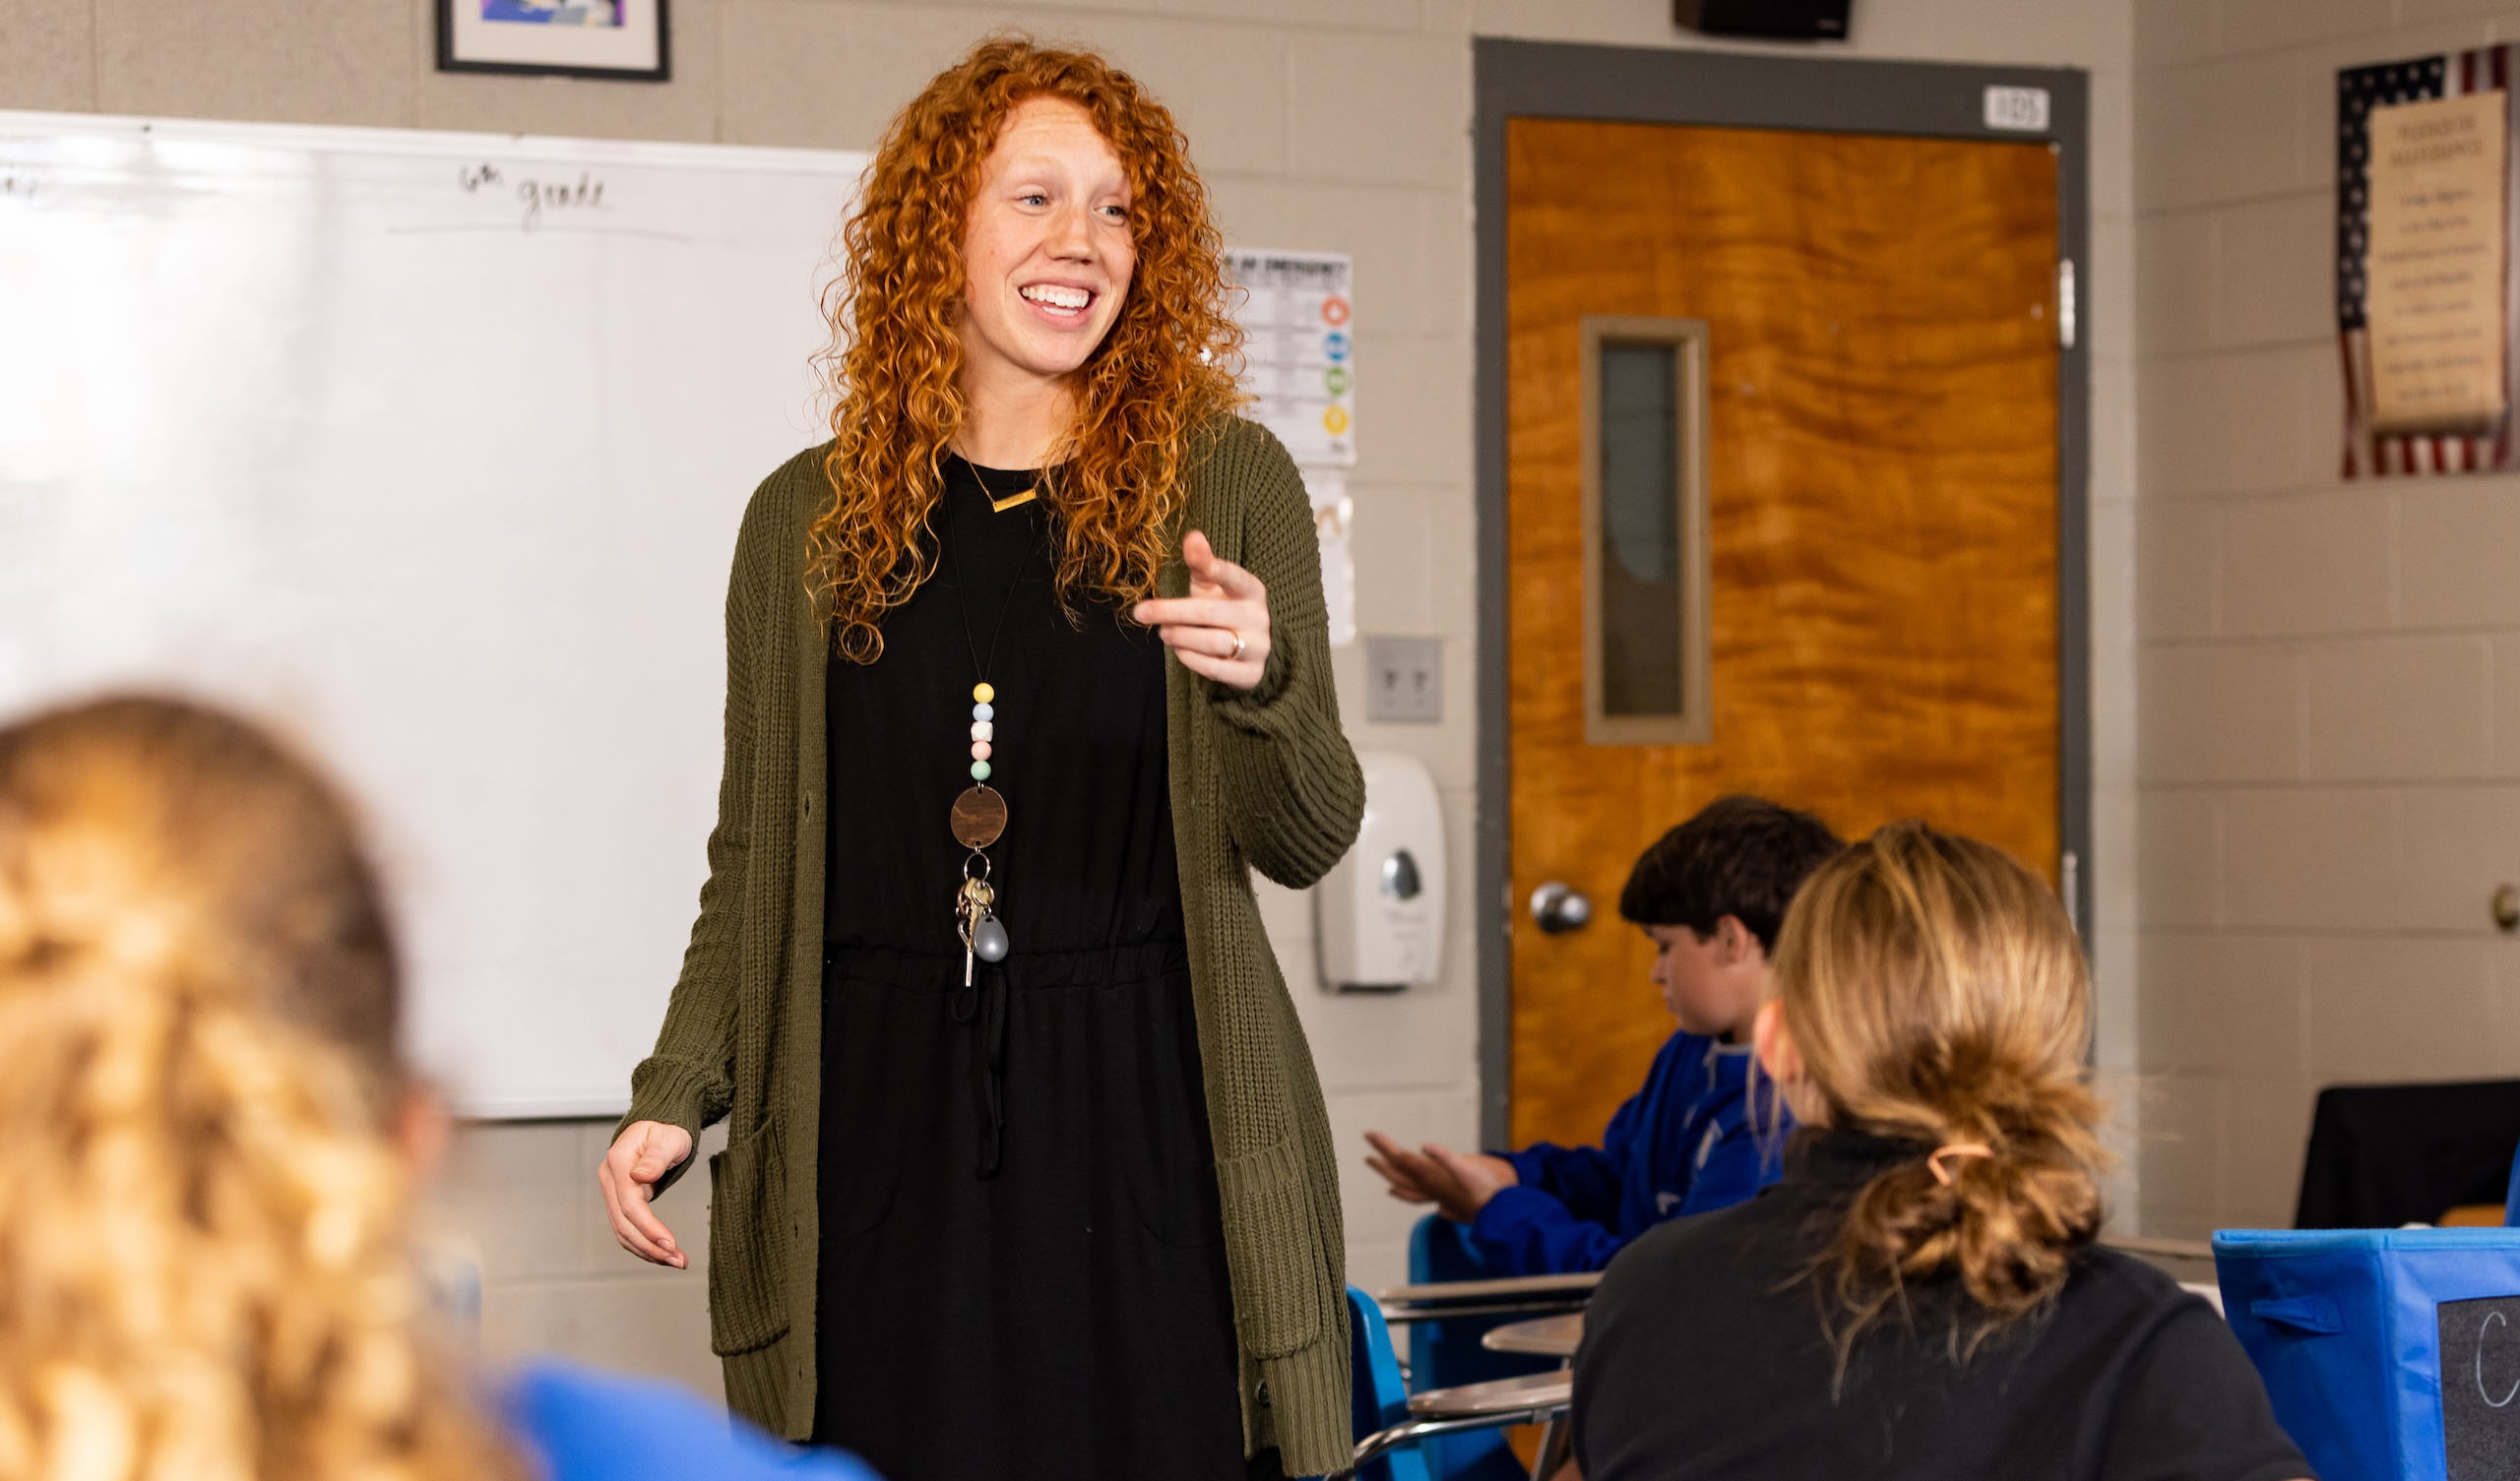 How do you become an ESL teacher in the state of Tennessee? How to get hired as a literacy coordinator in Tennessee? How to become a school adolescent literacy teacher in Tennessee?